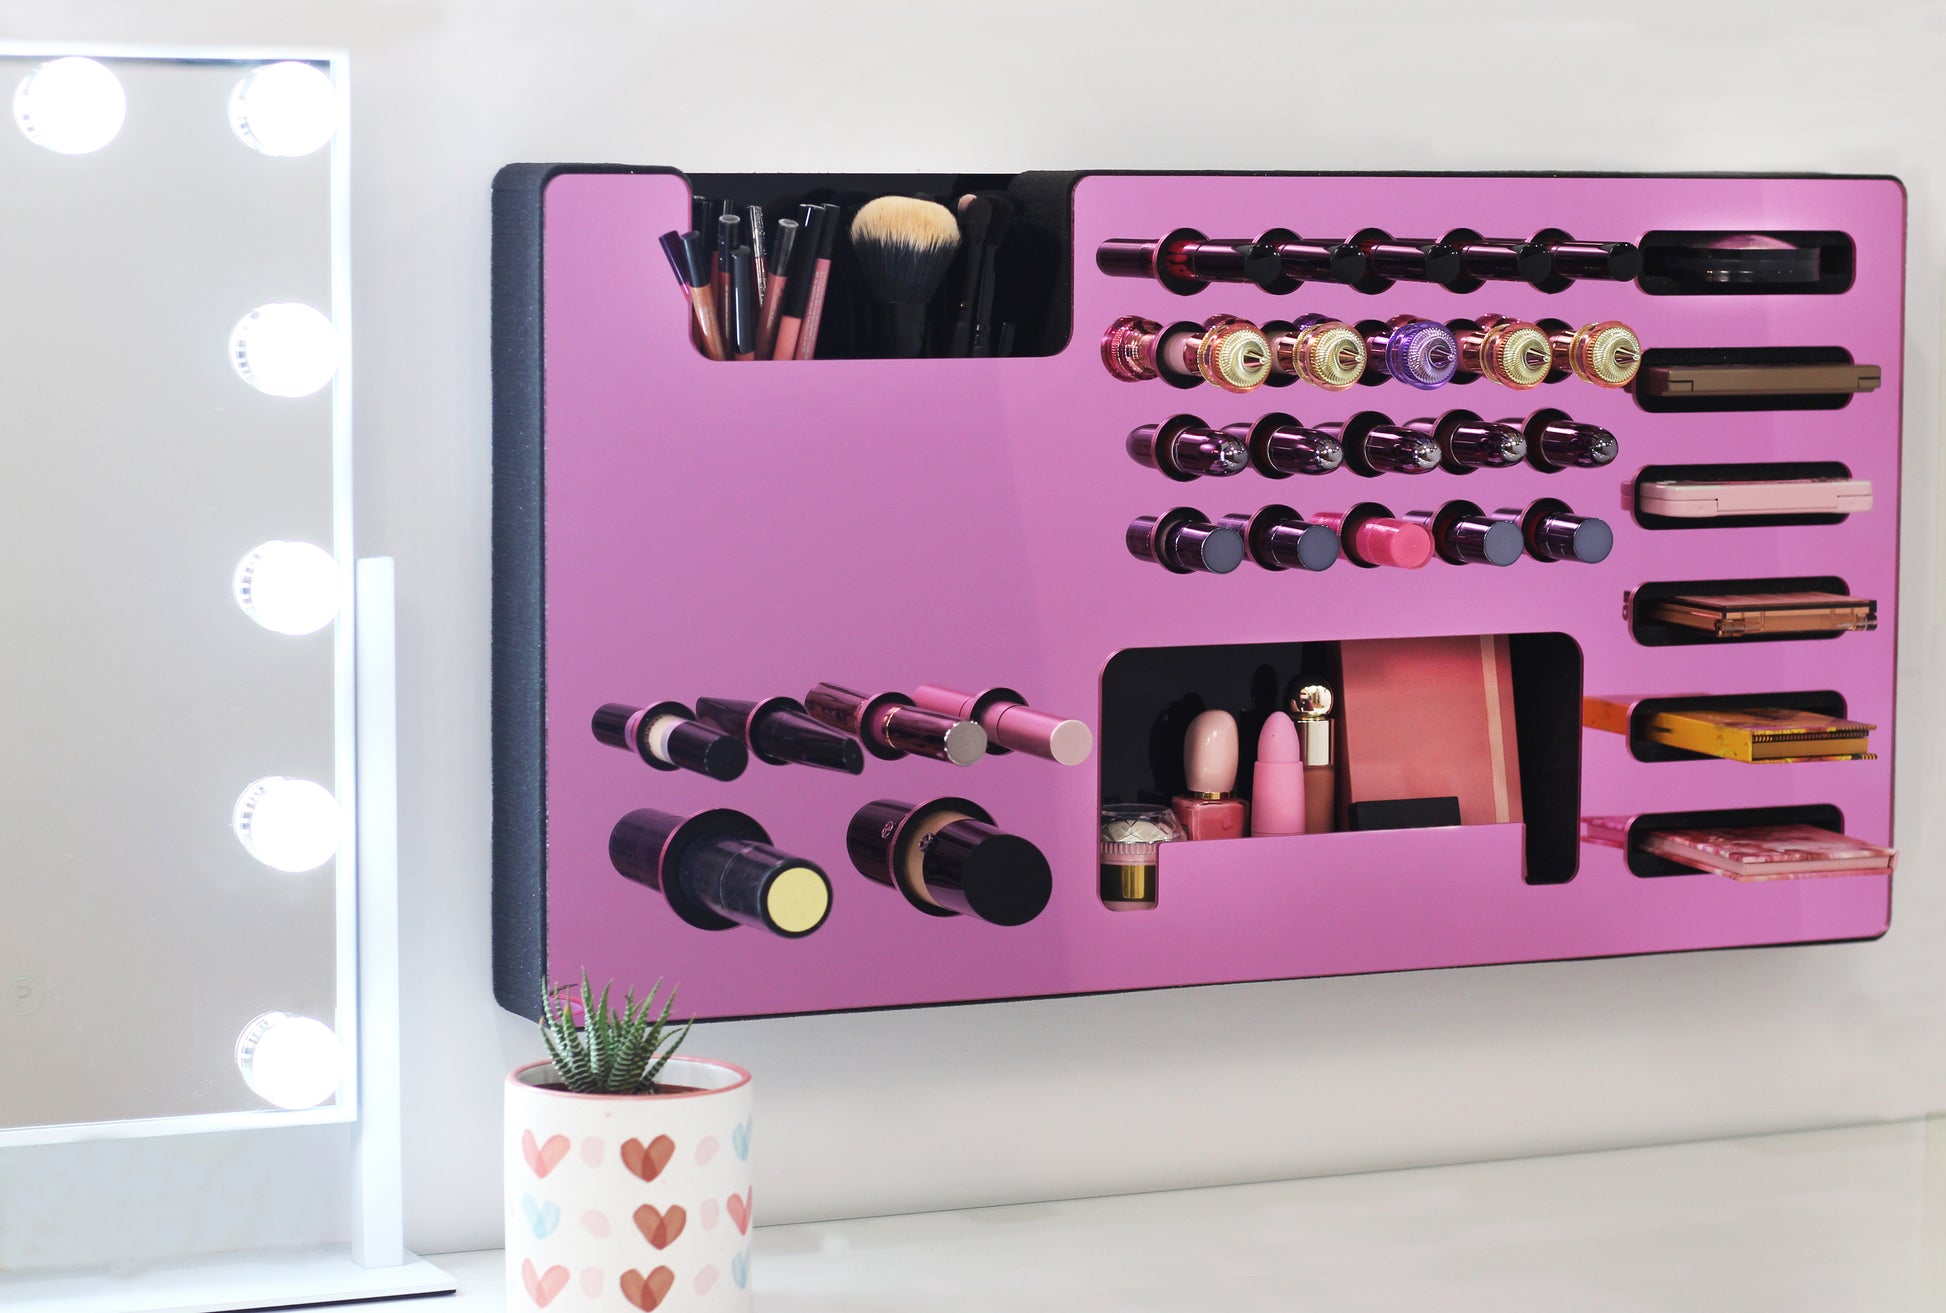 Mirror Pink Ultra Complete Makeup Solution Organizer shown mounted on the wall holding lipsticks, lip glosses, nail polishes, brushes, sunglasses and more by keeping items accessible and off of the counter. Shown next to a makeup vanity with samples of suggested items the organizer can hold. Tilted to the right to show the wall mounted makeup organizer at a different angle while still on the wall.